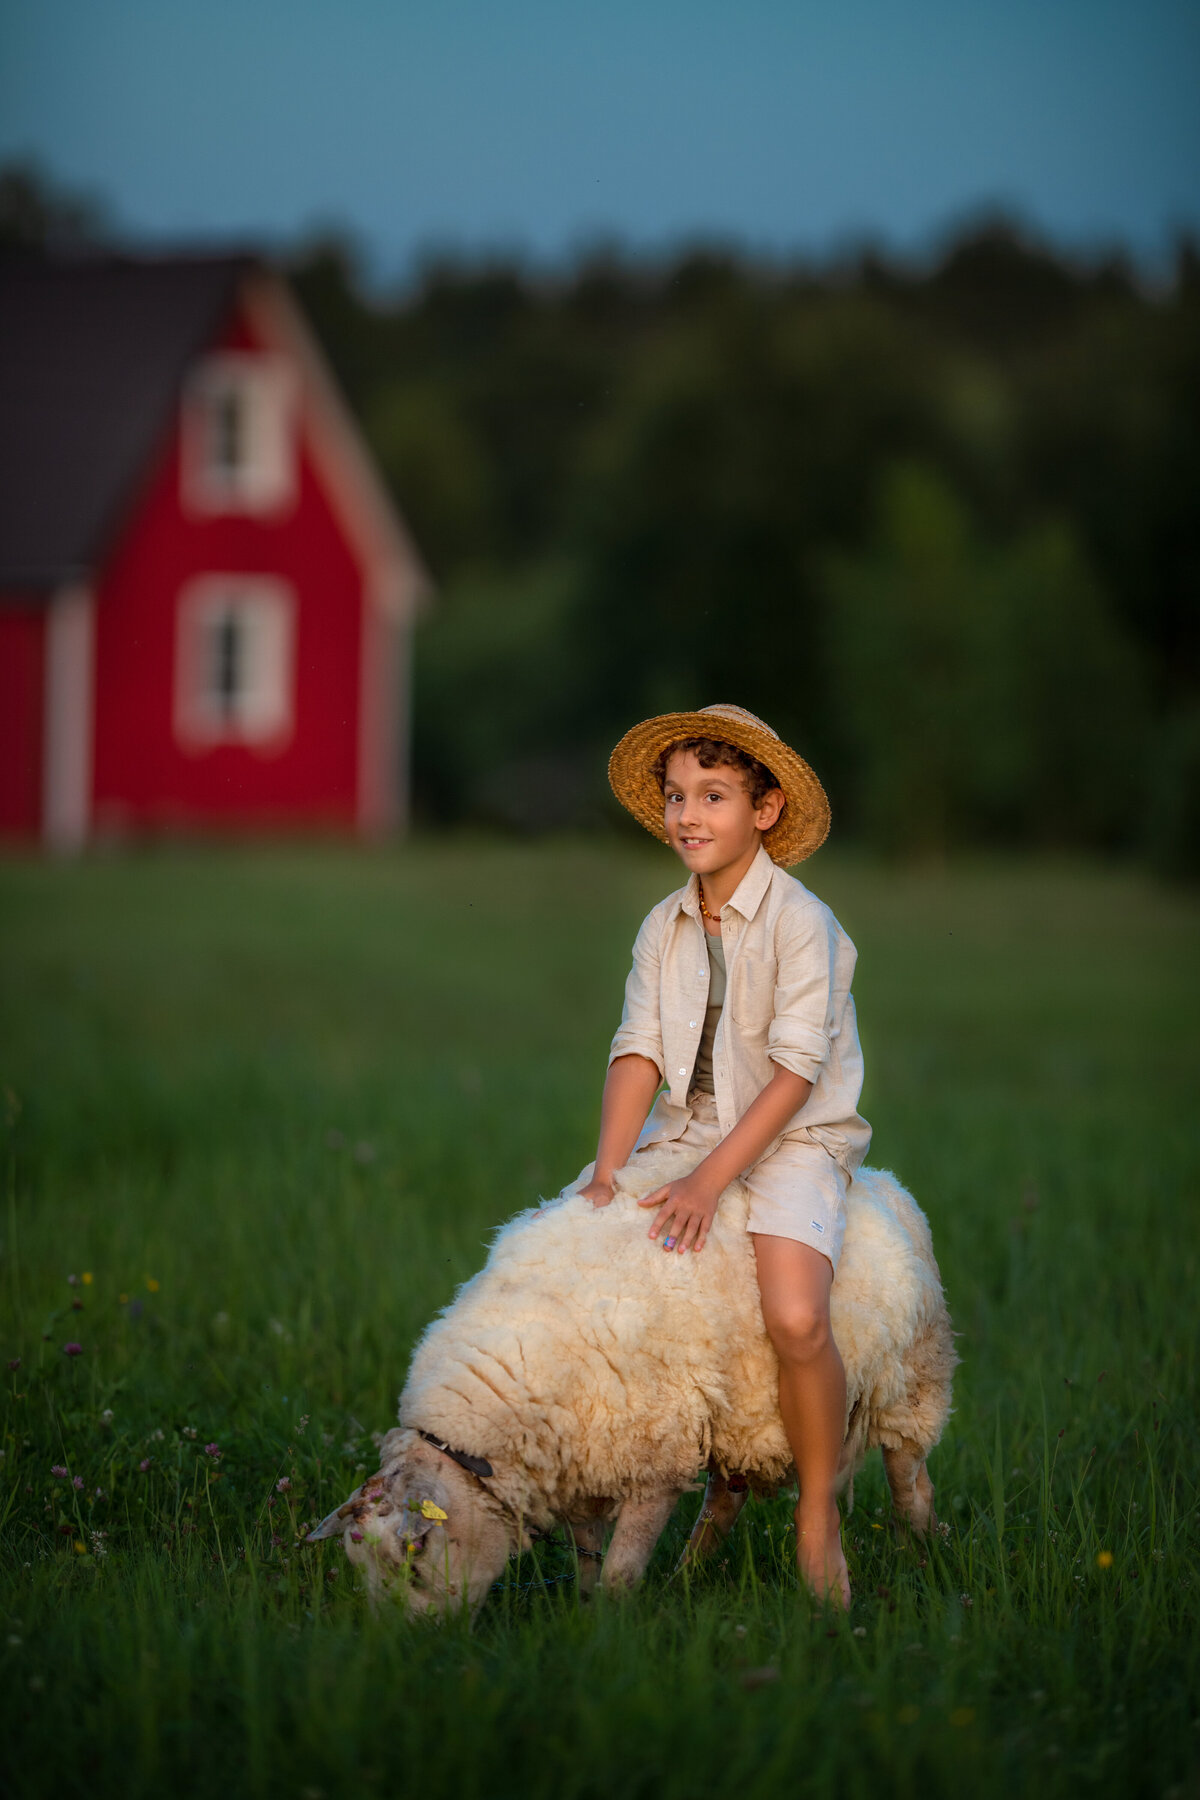 Boy riding a fluffy sheep in the farm in Lithuania